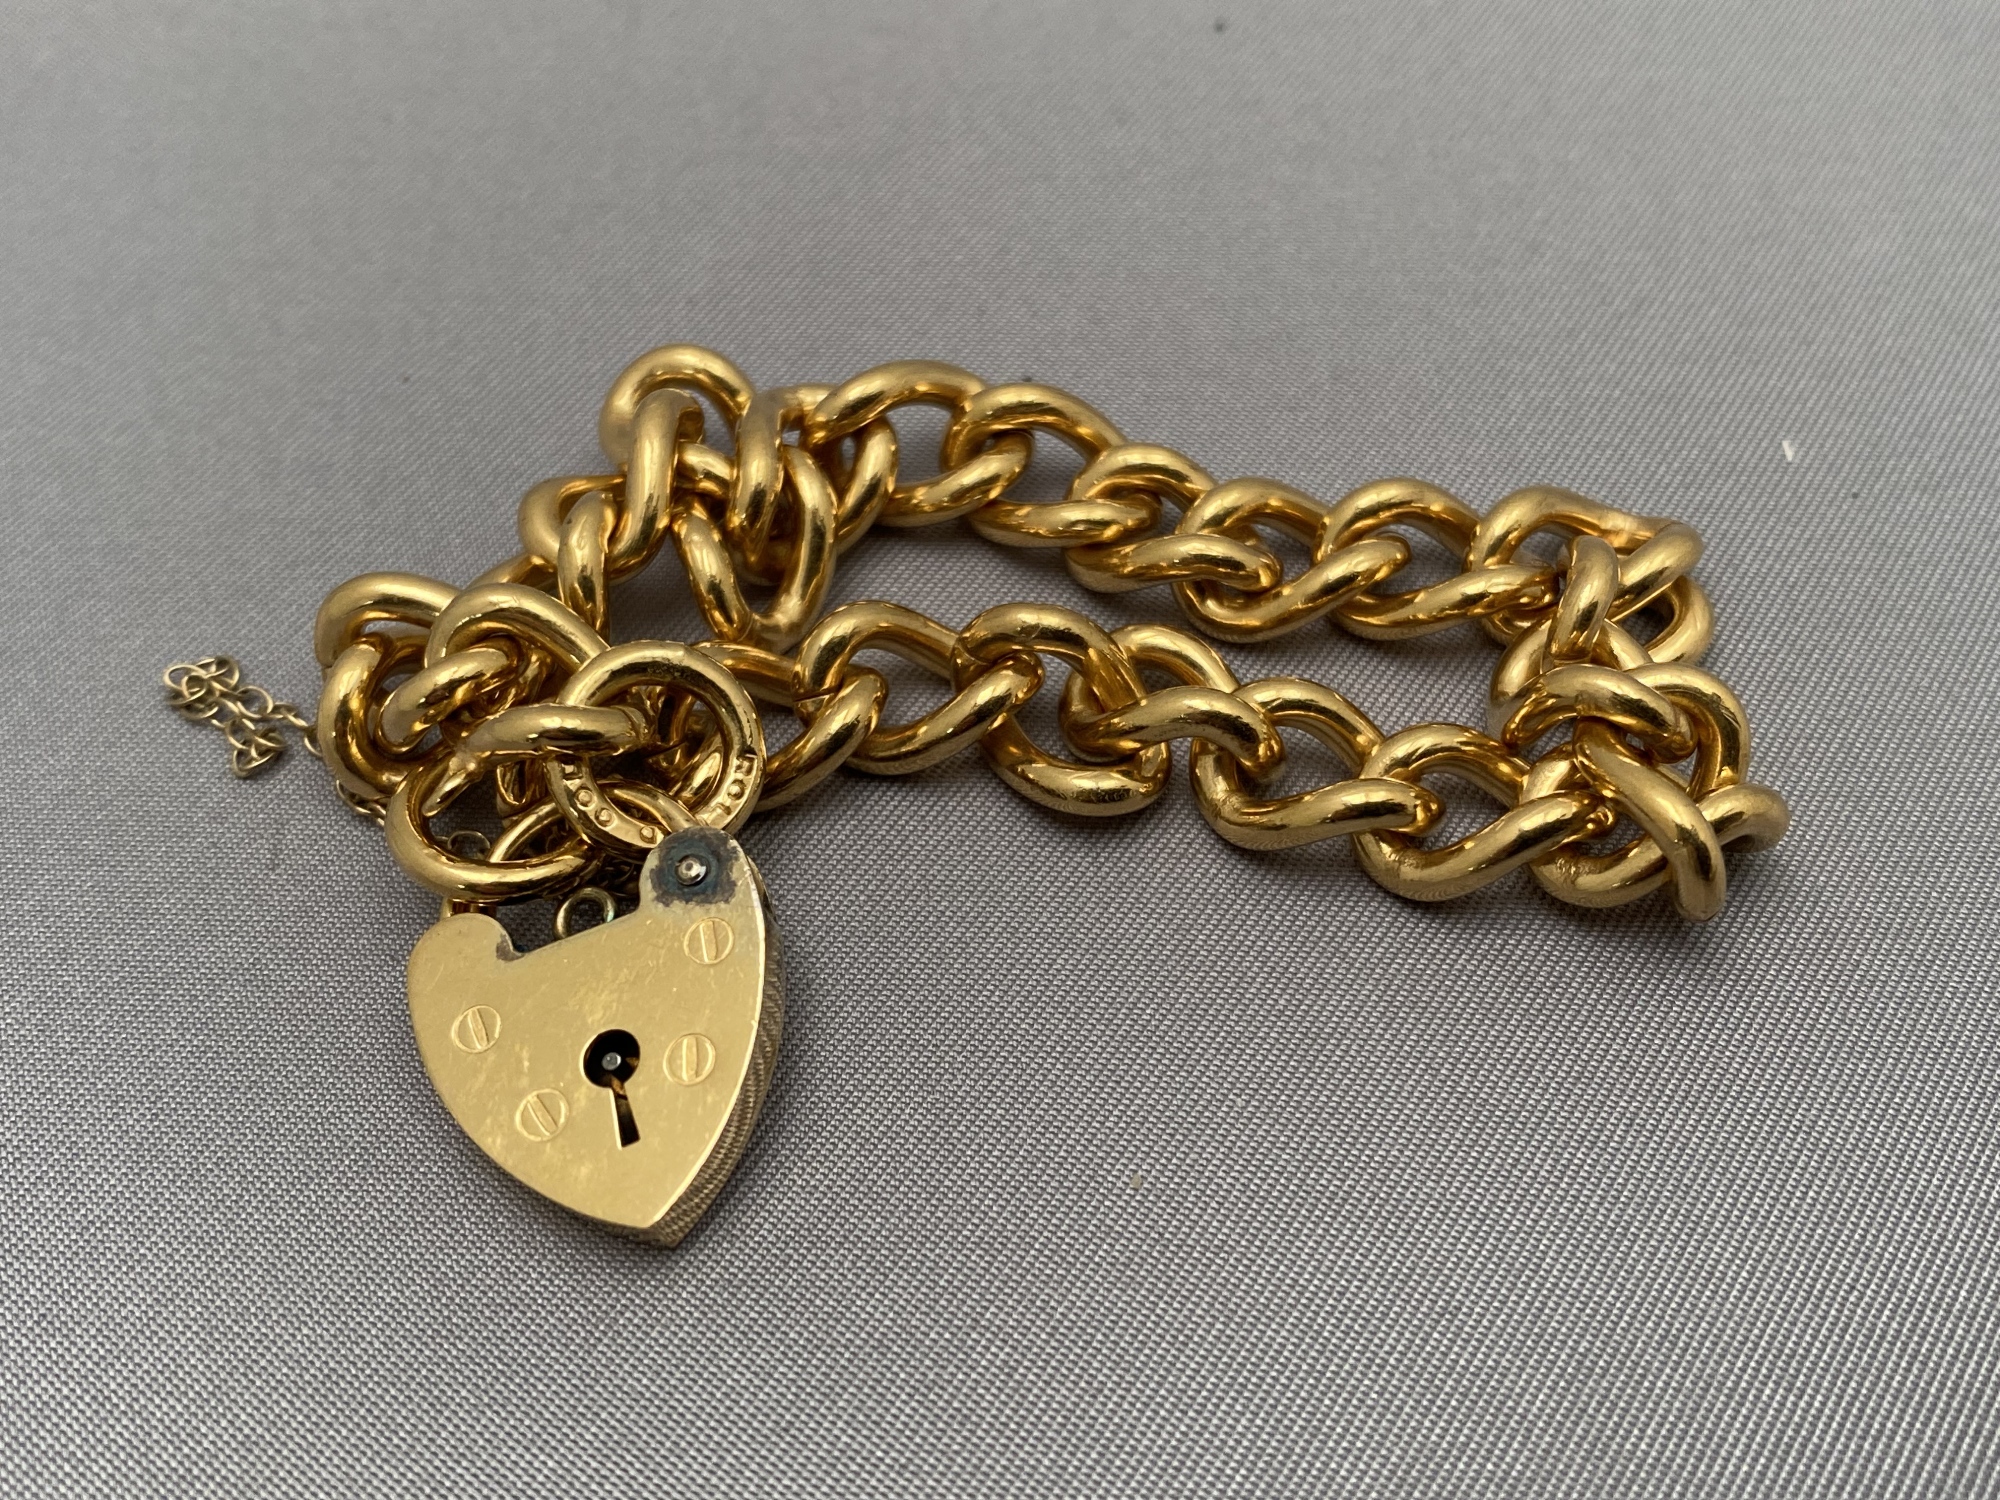 A rolled gold bracelet with heart lock